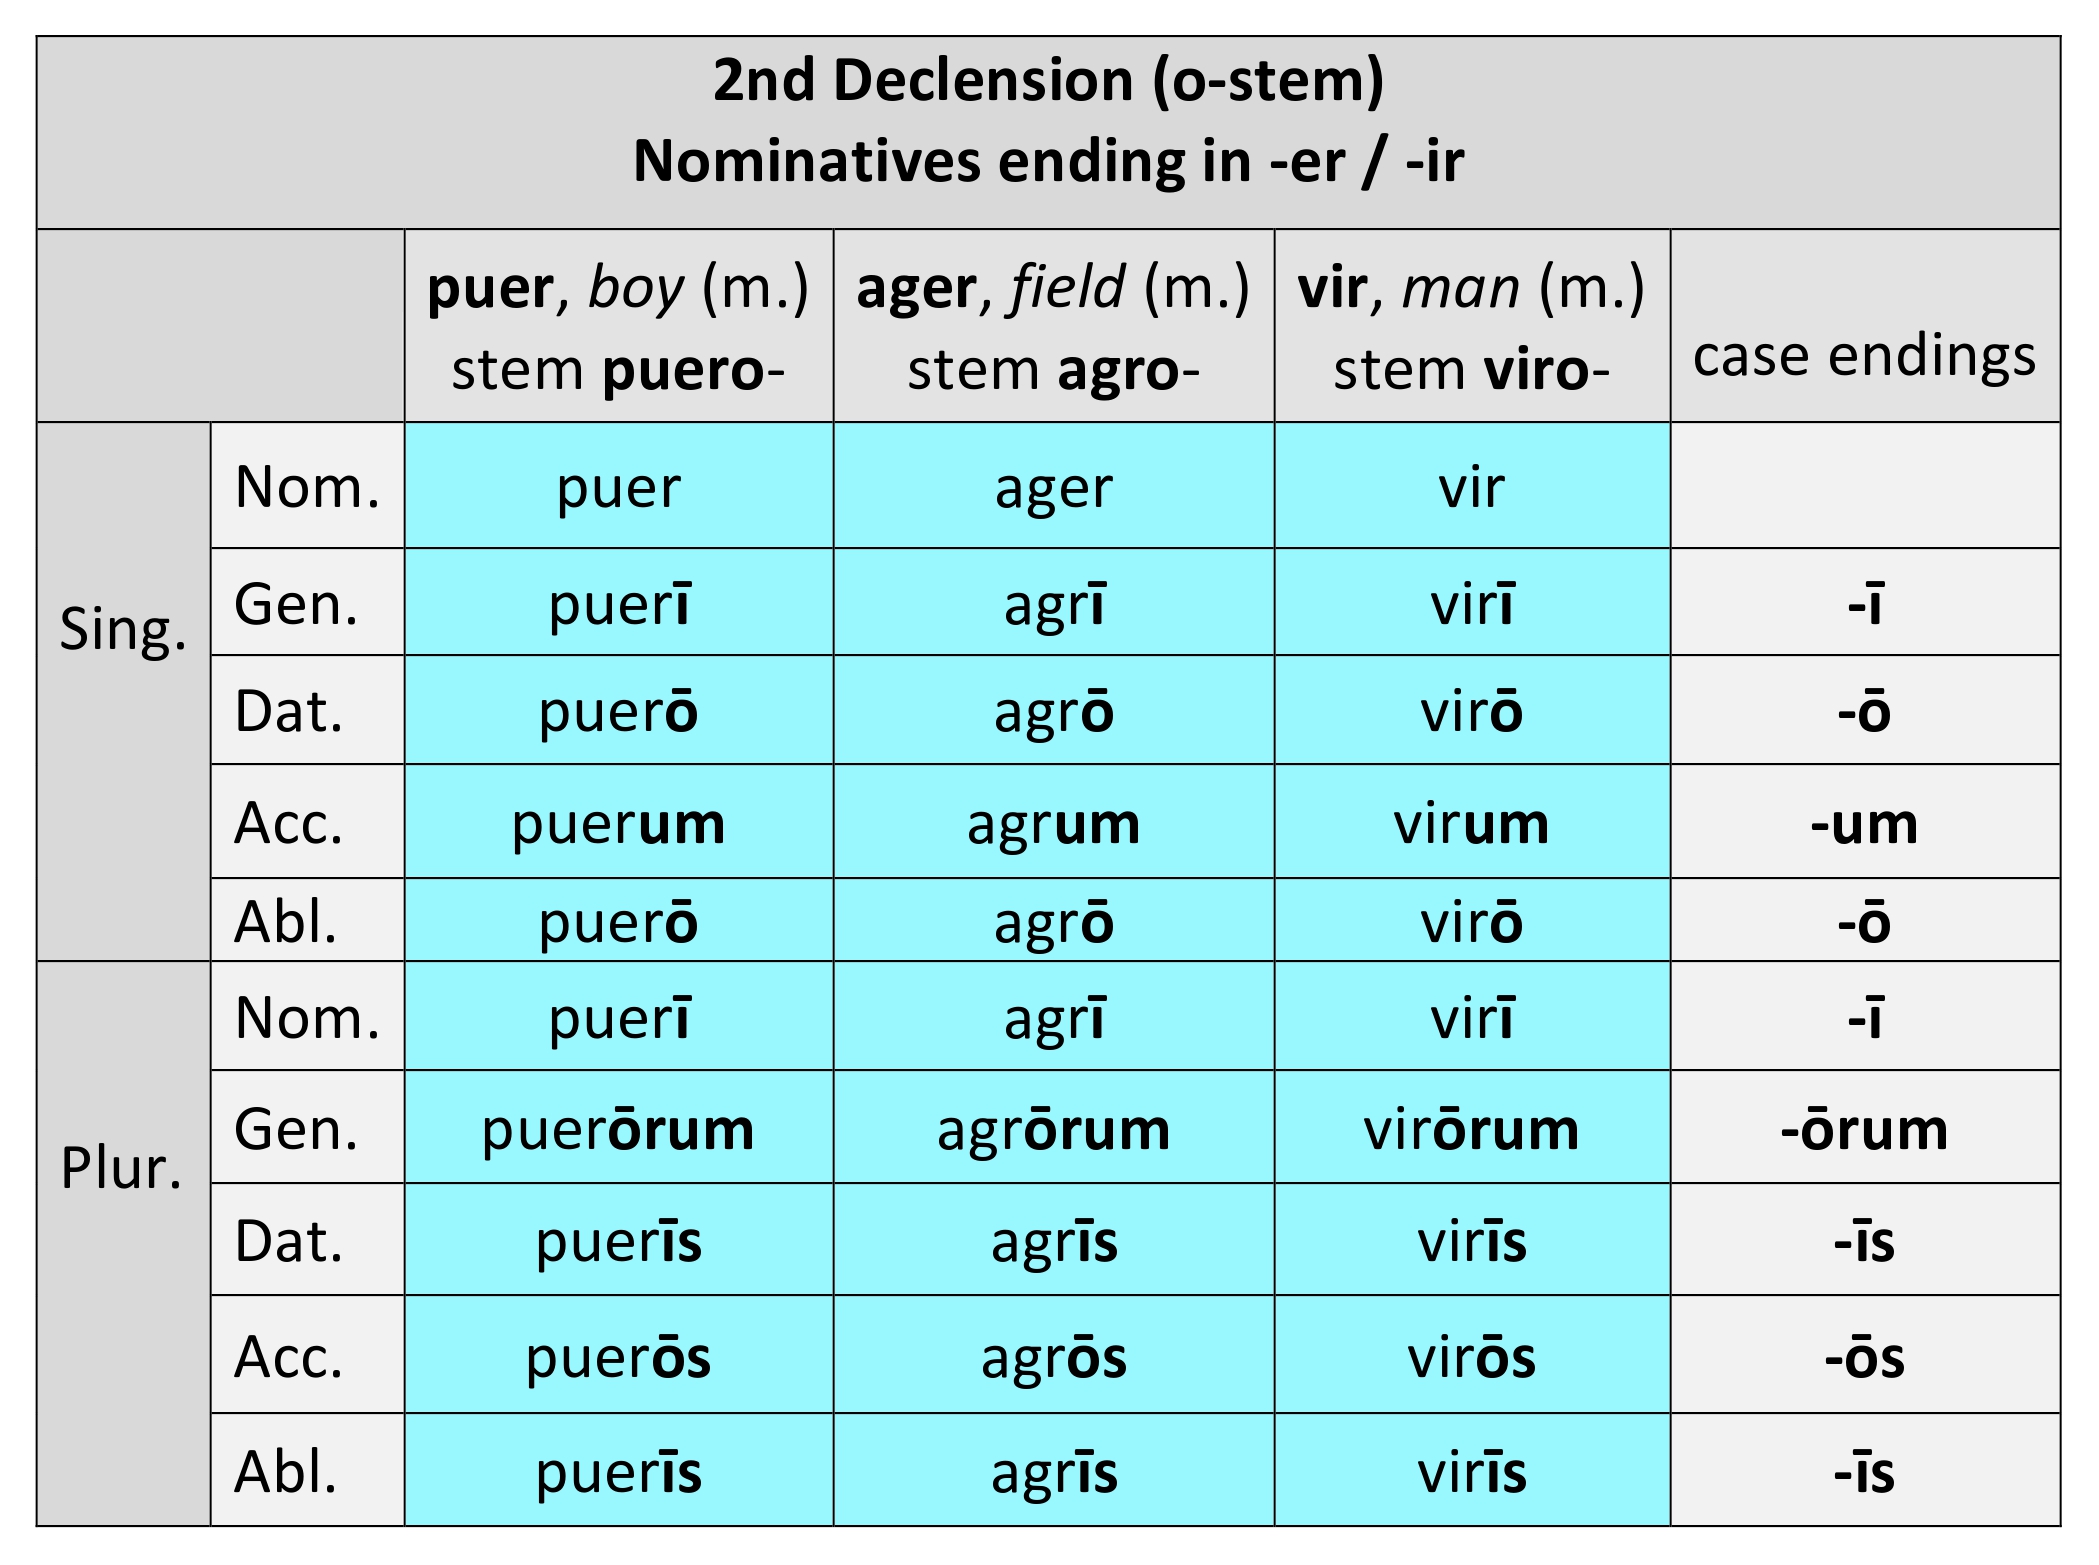 Paradigm for nouns of the 2nd declension in -er and -ir are